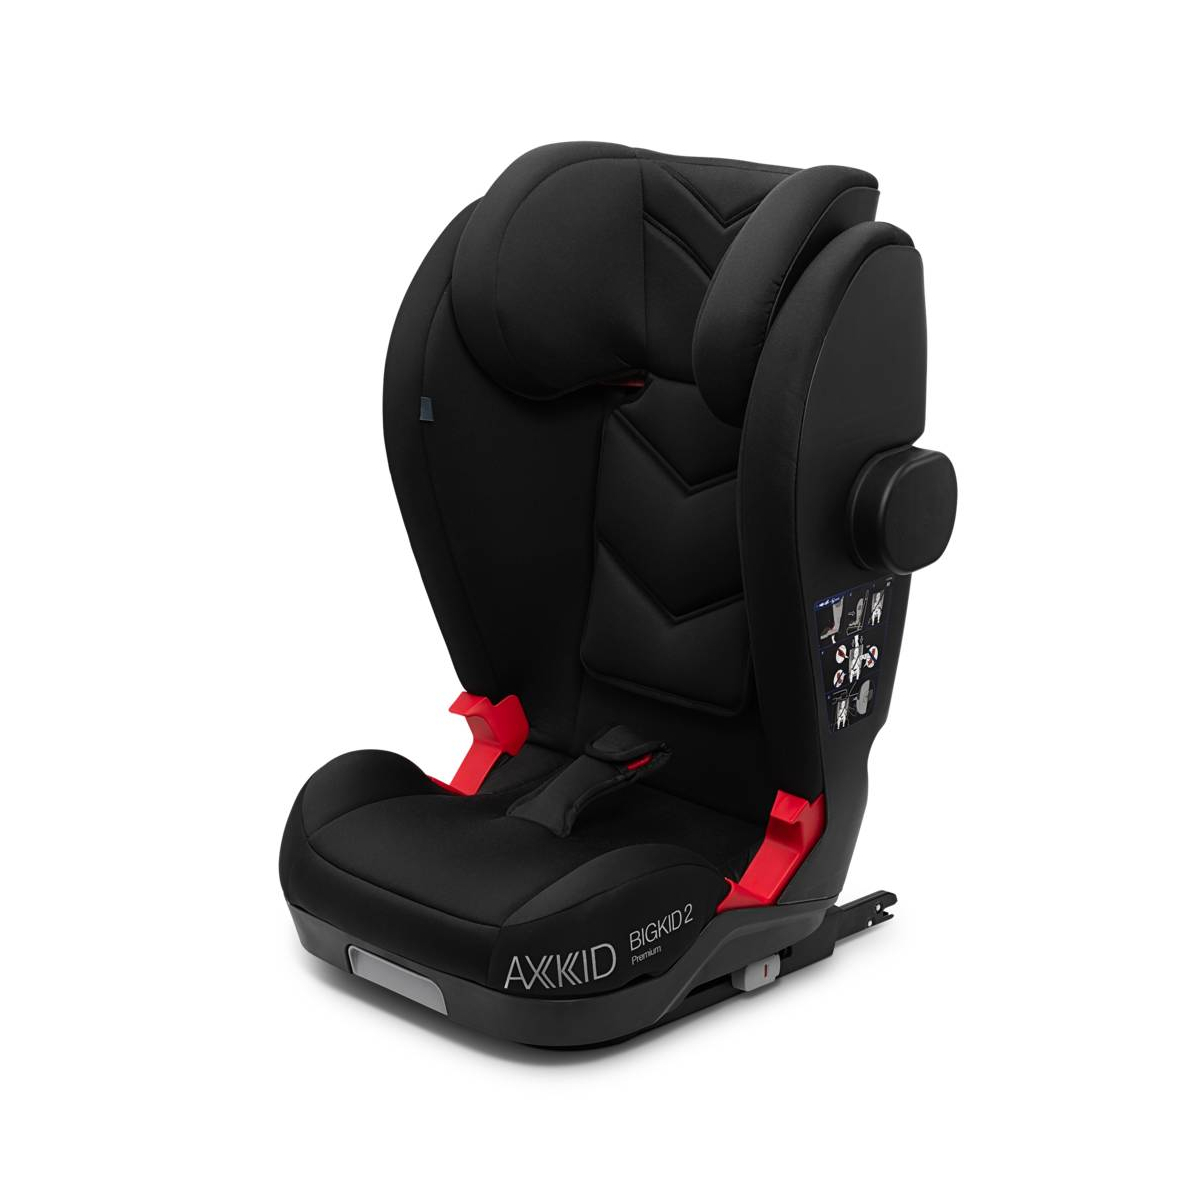 Axkid Bigkid 2 Booster Group 2/3 Car Seat